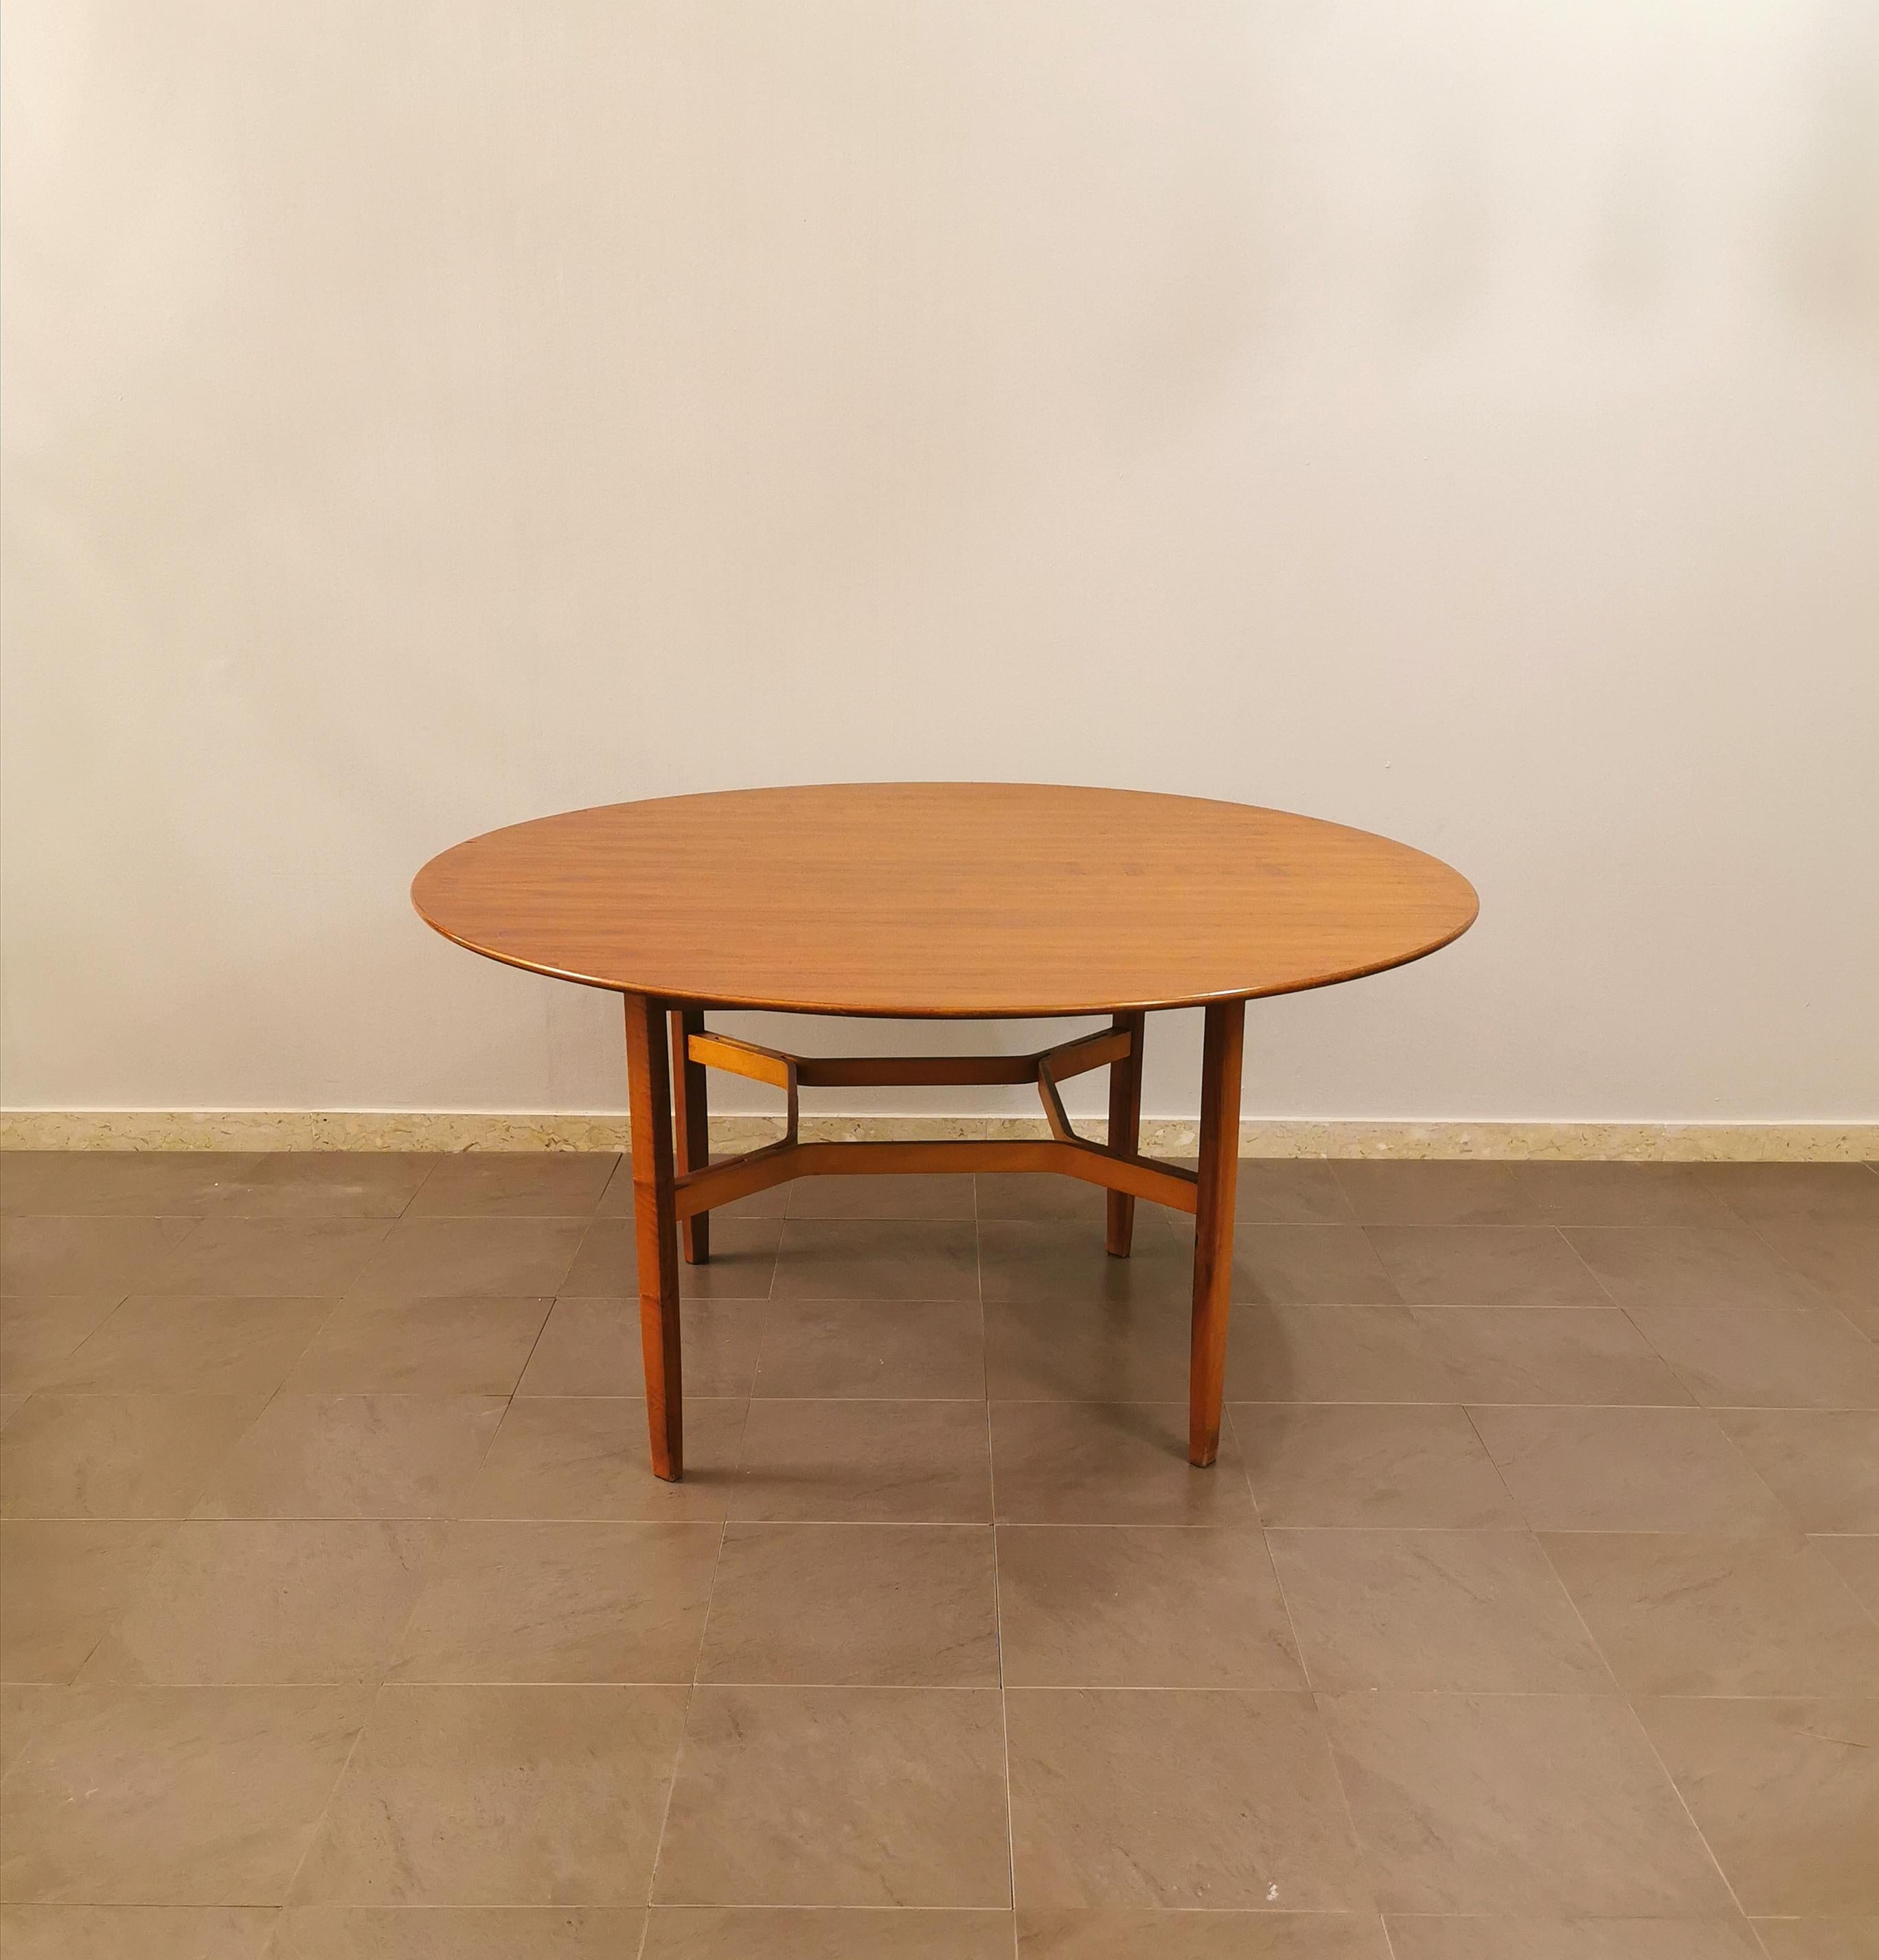 Dining table by the unknown designer in veneered wood with a round top resting on a quadripod structure. Italian production of the 60s.